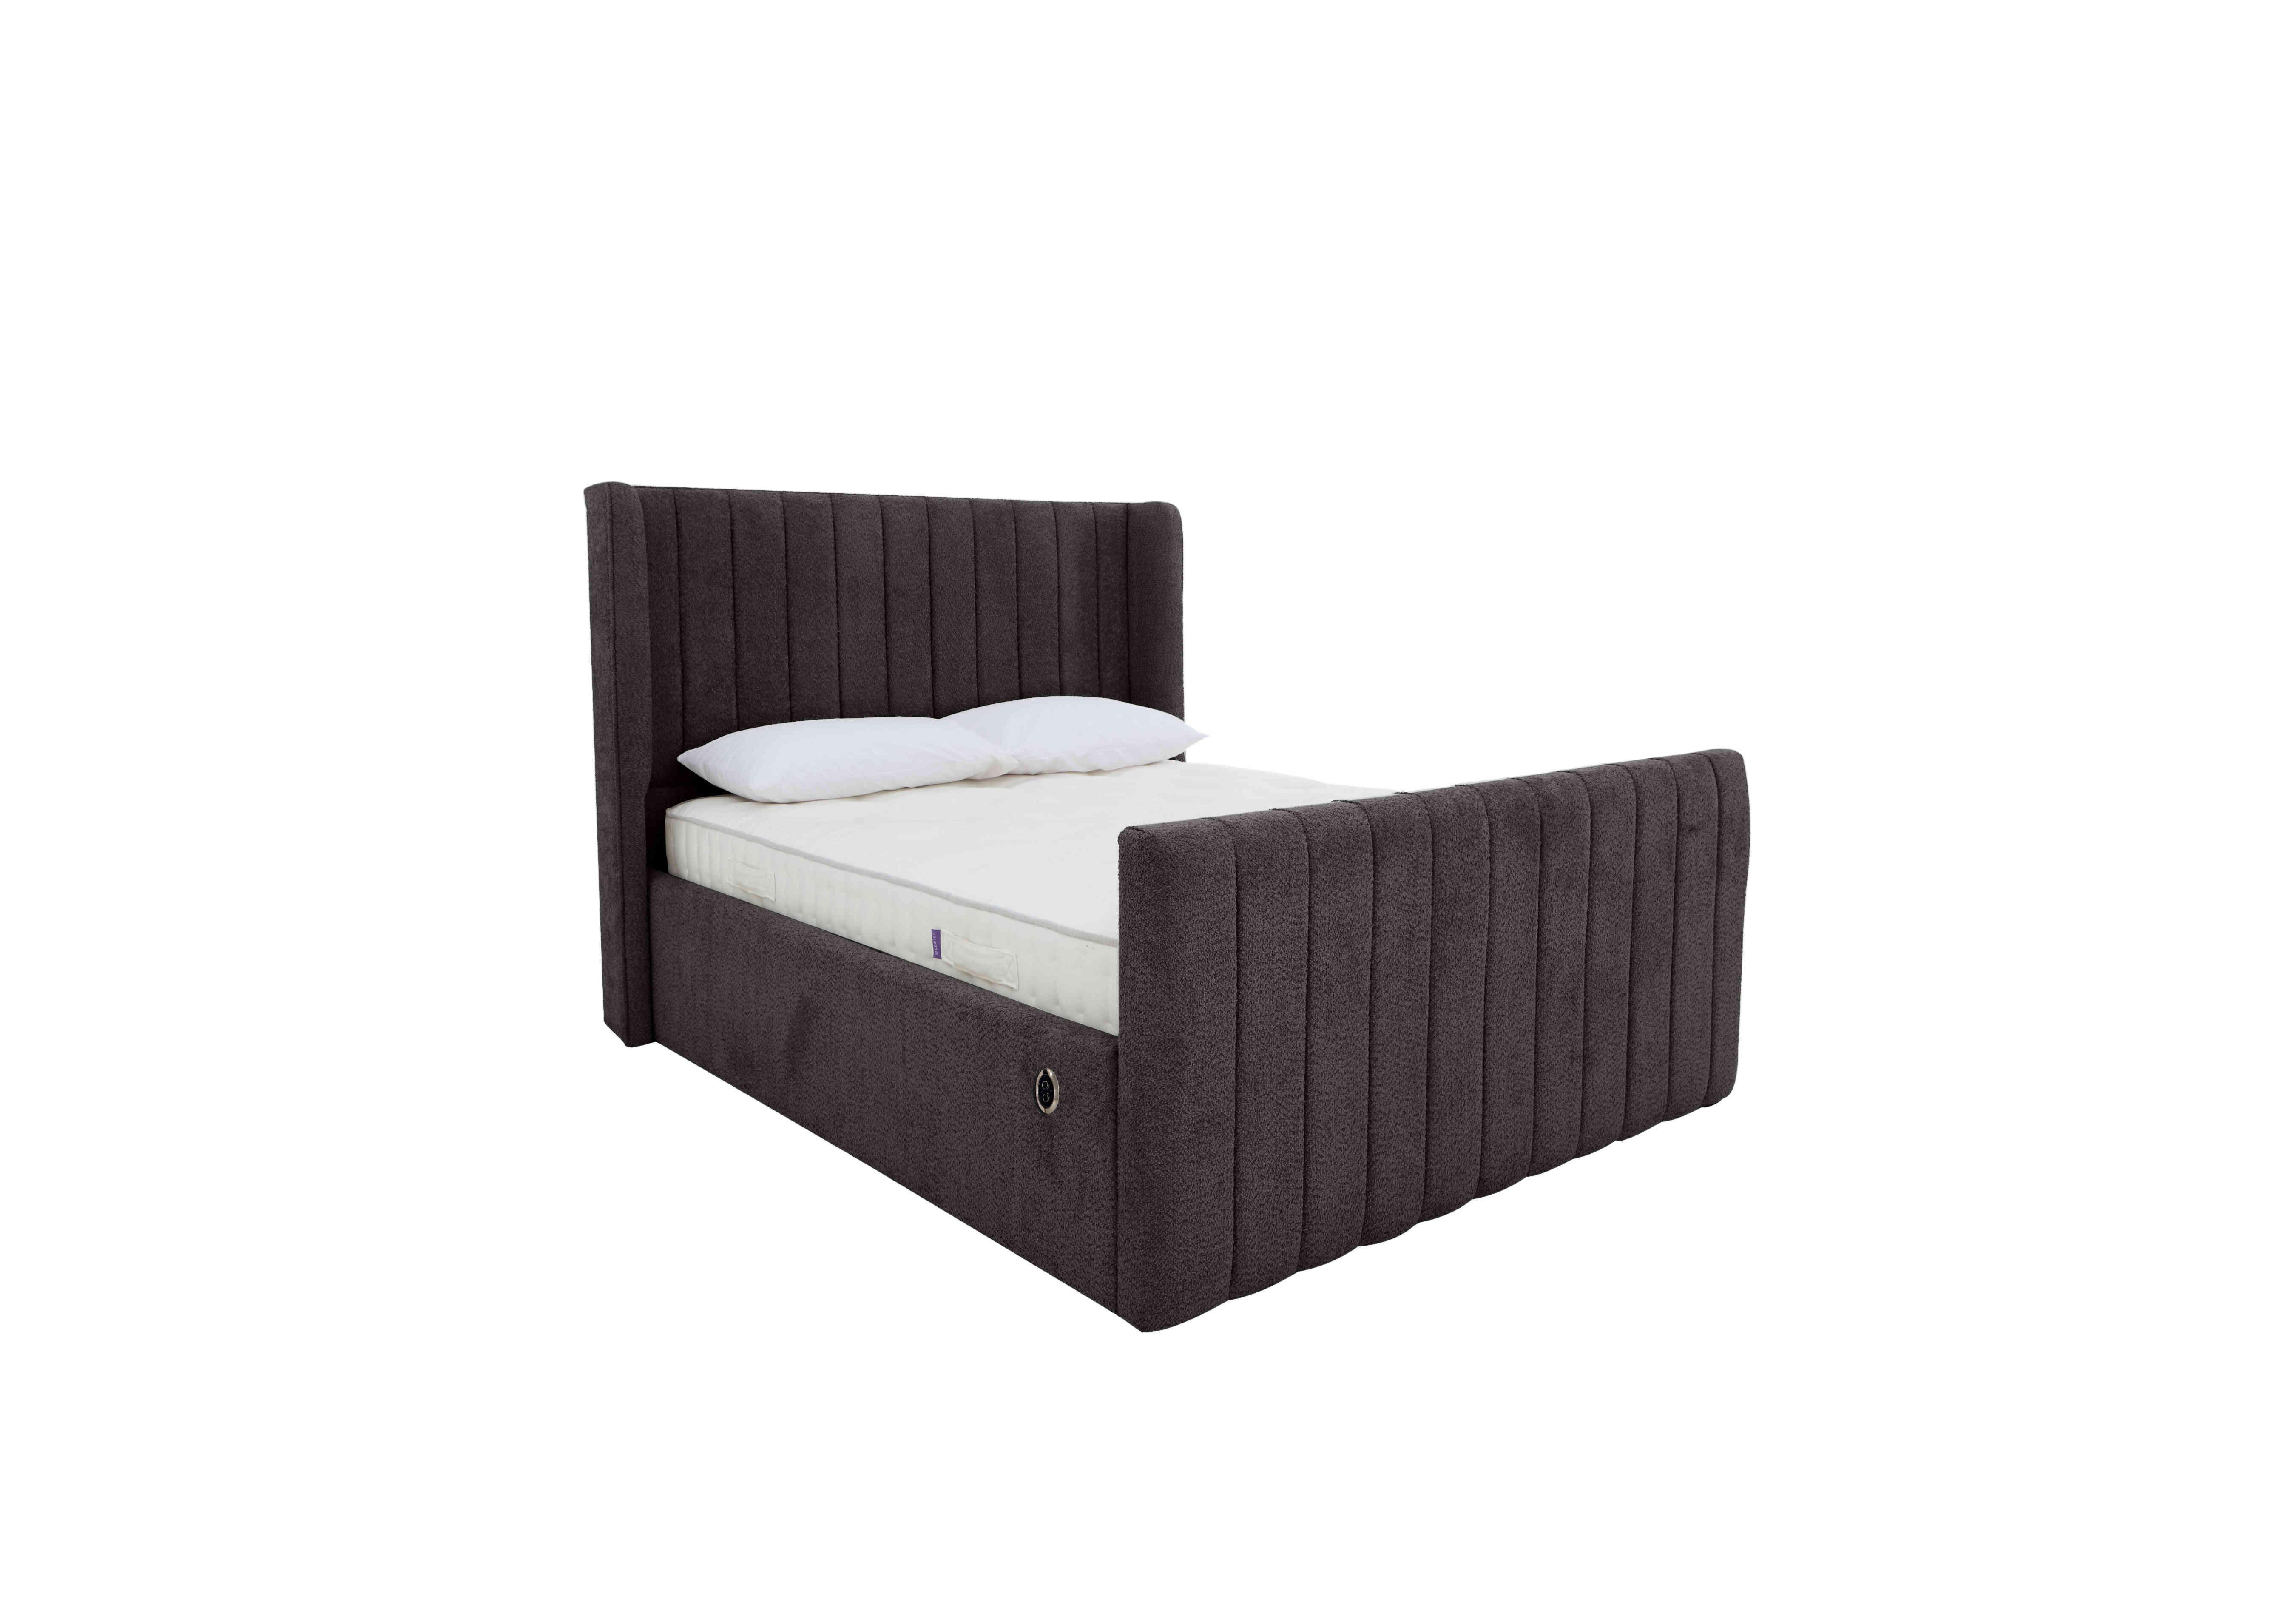 Eira High Foot End Electric Ottoman Bed Frame in Comfy Black on Furniture Village